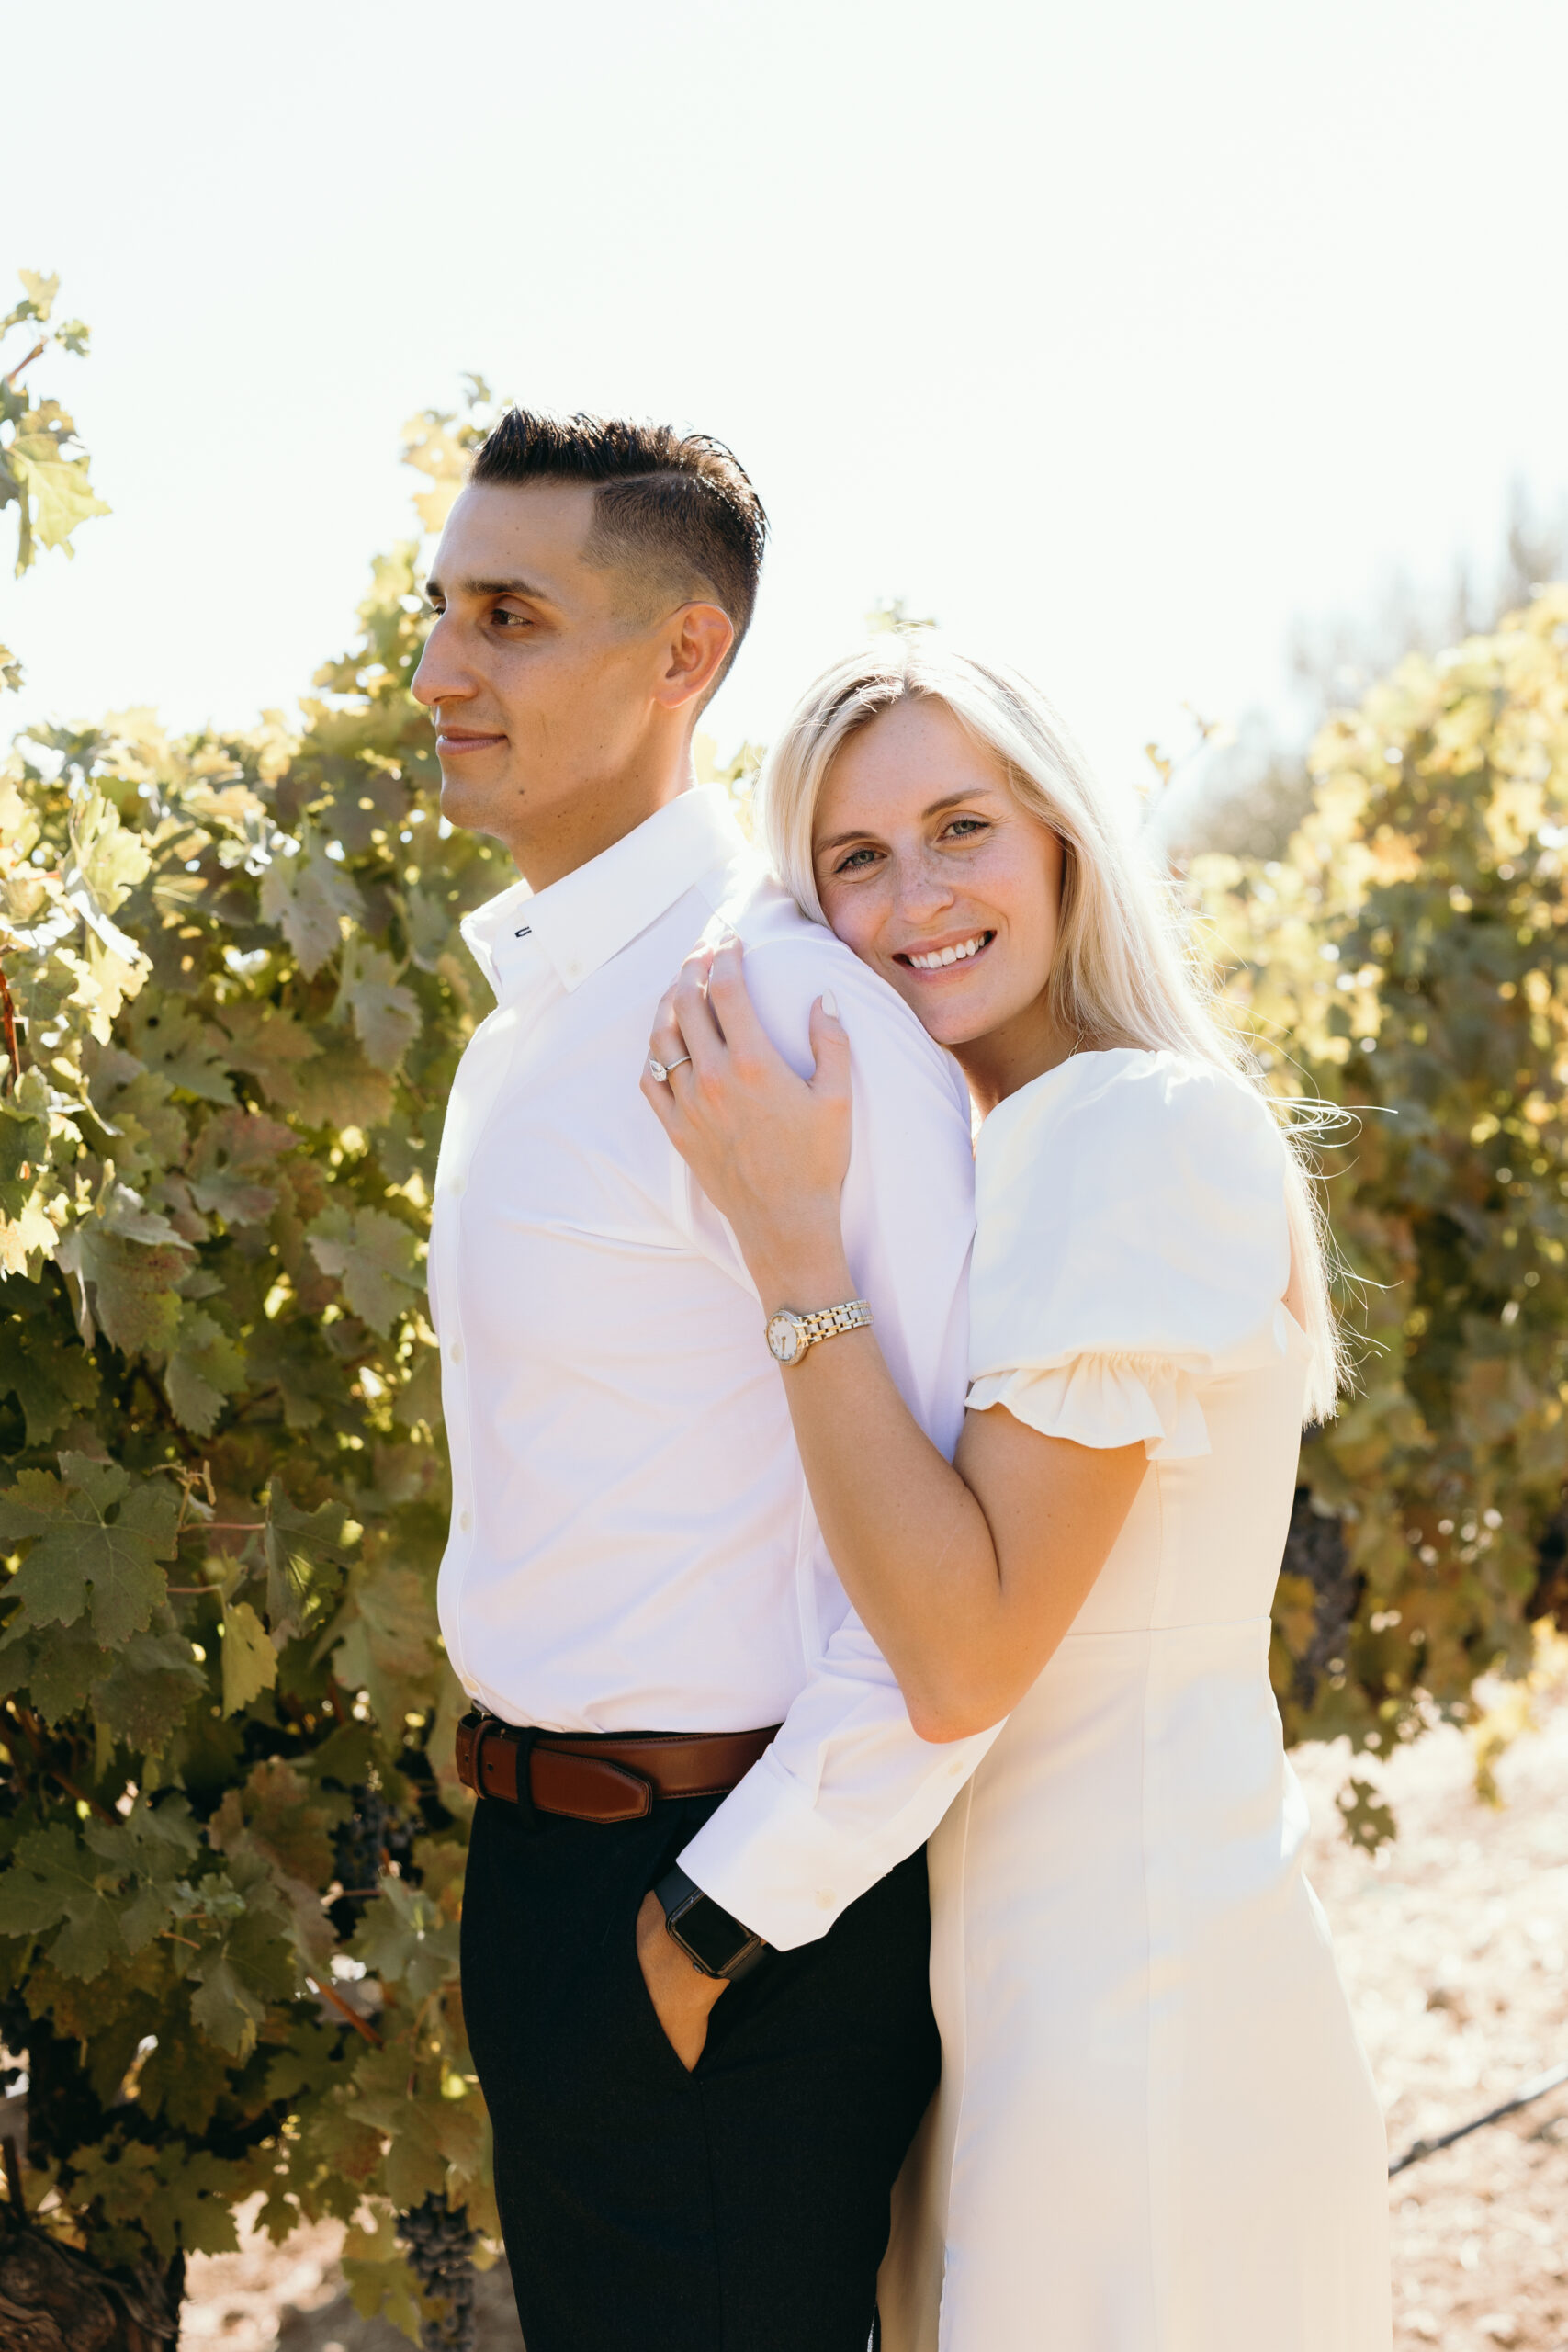 Sonoma county Wedding photographer captures this beautiful moment amongst the vineyards